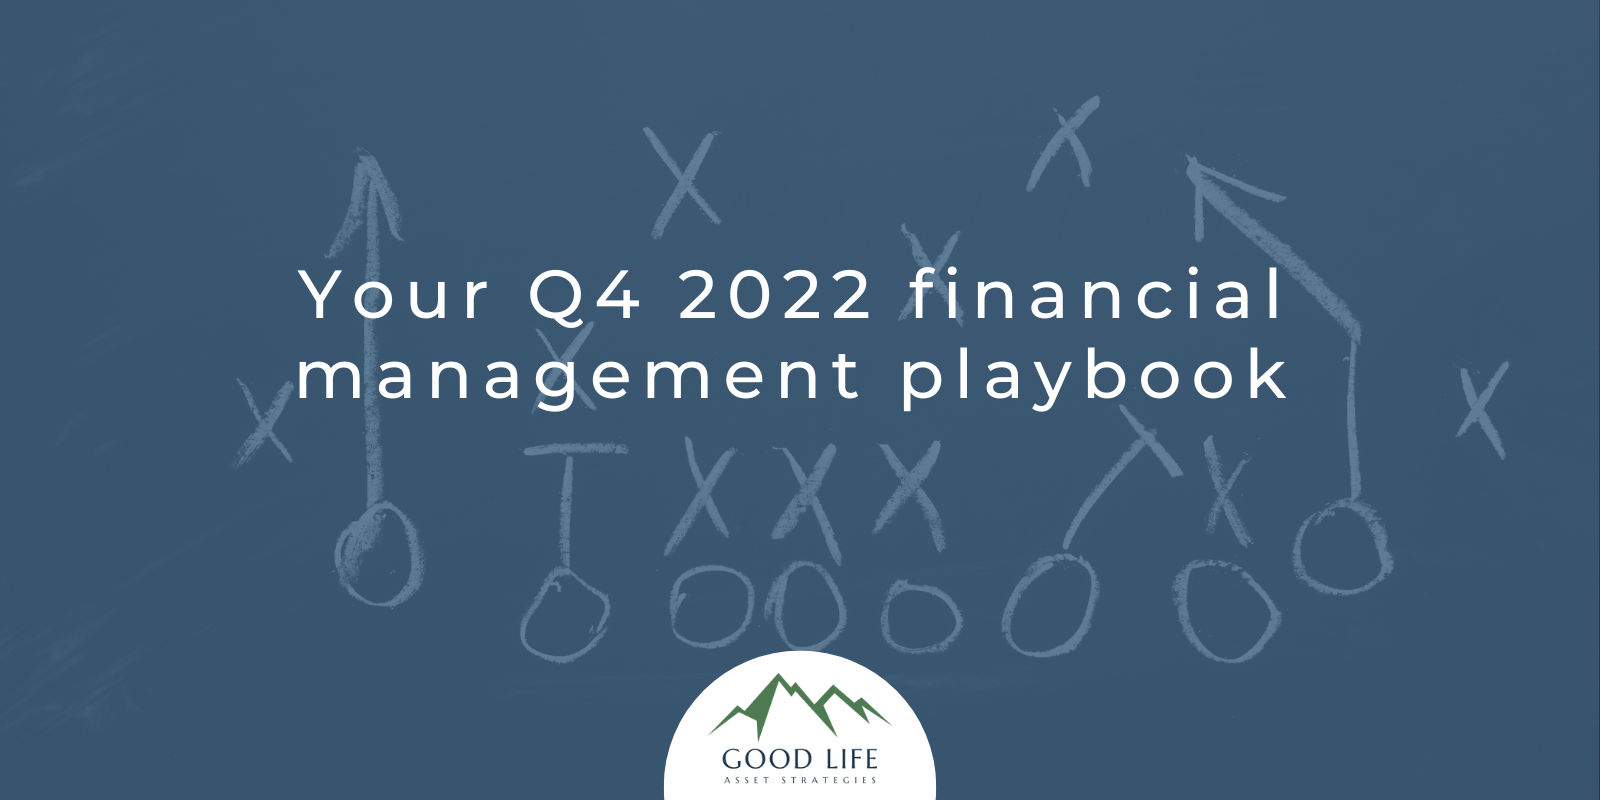 Financial management in 2022